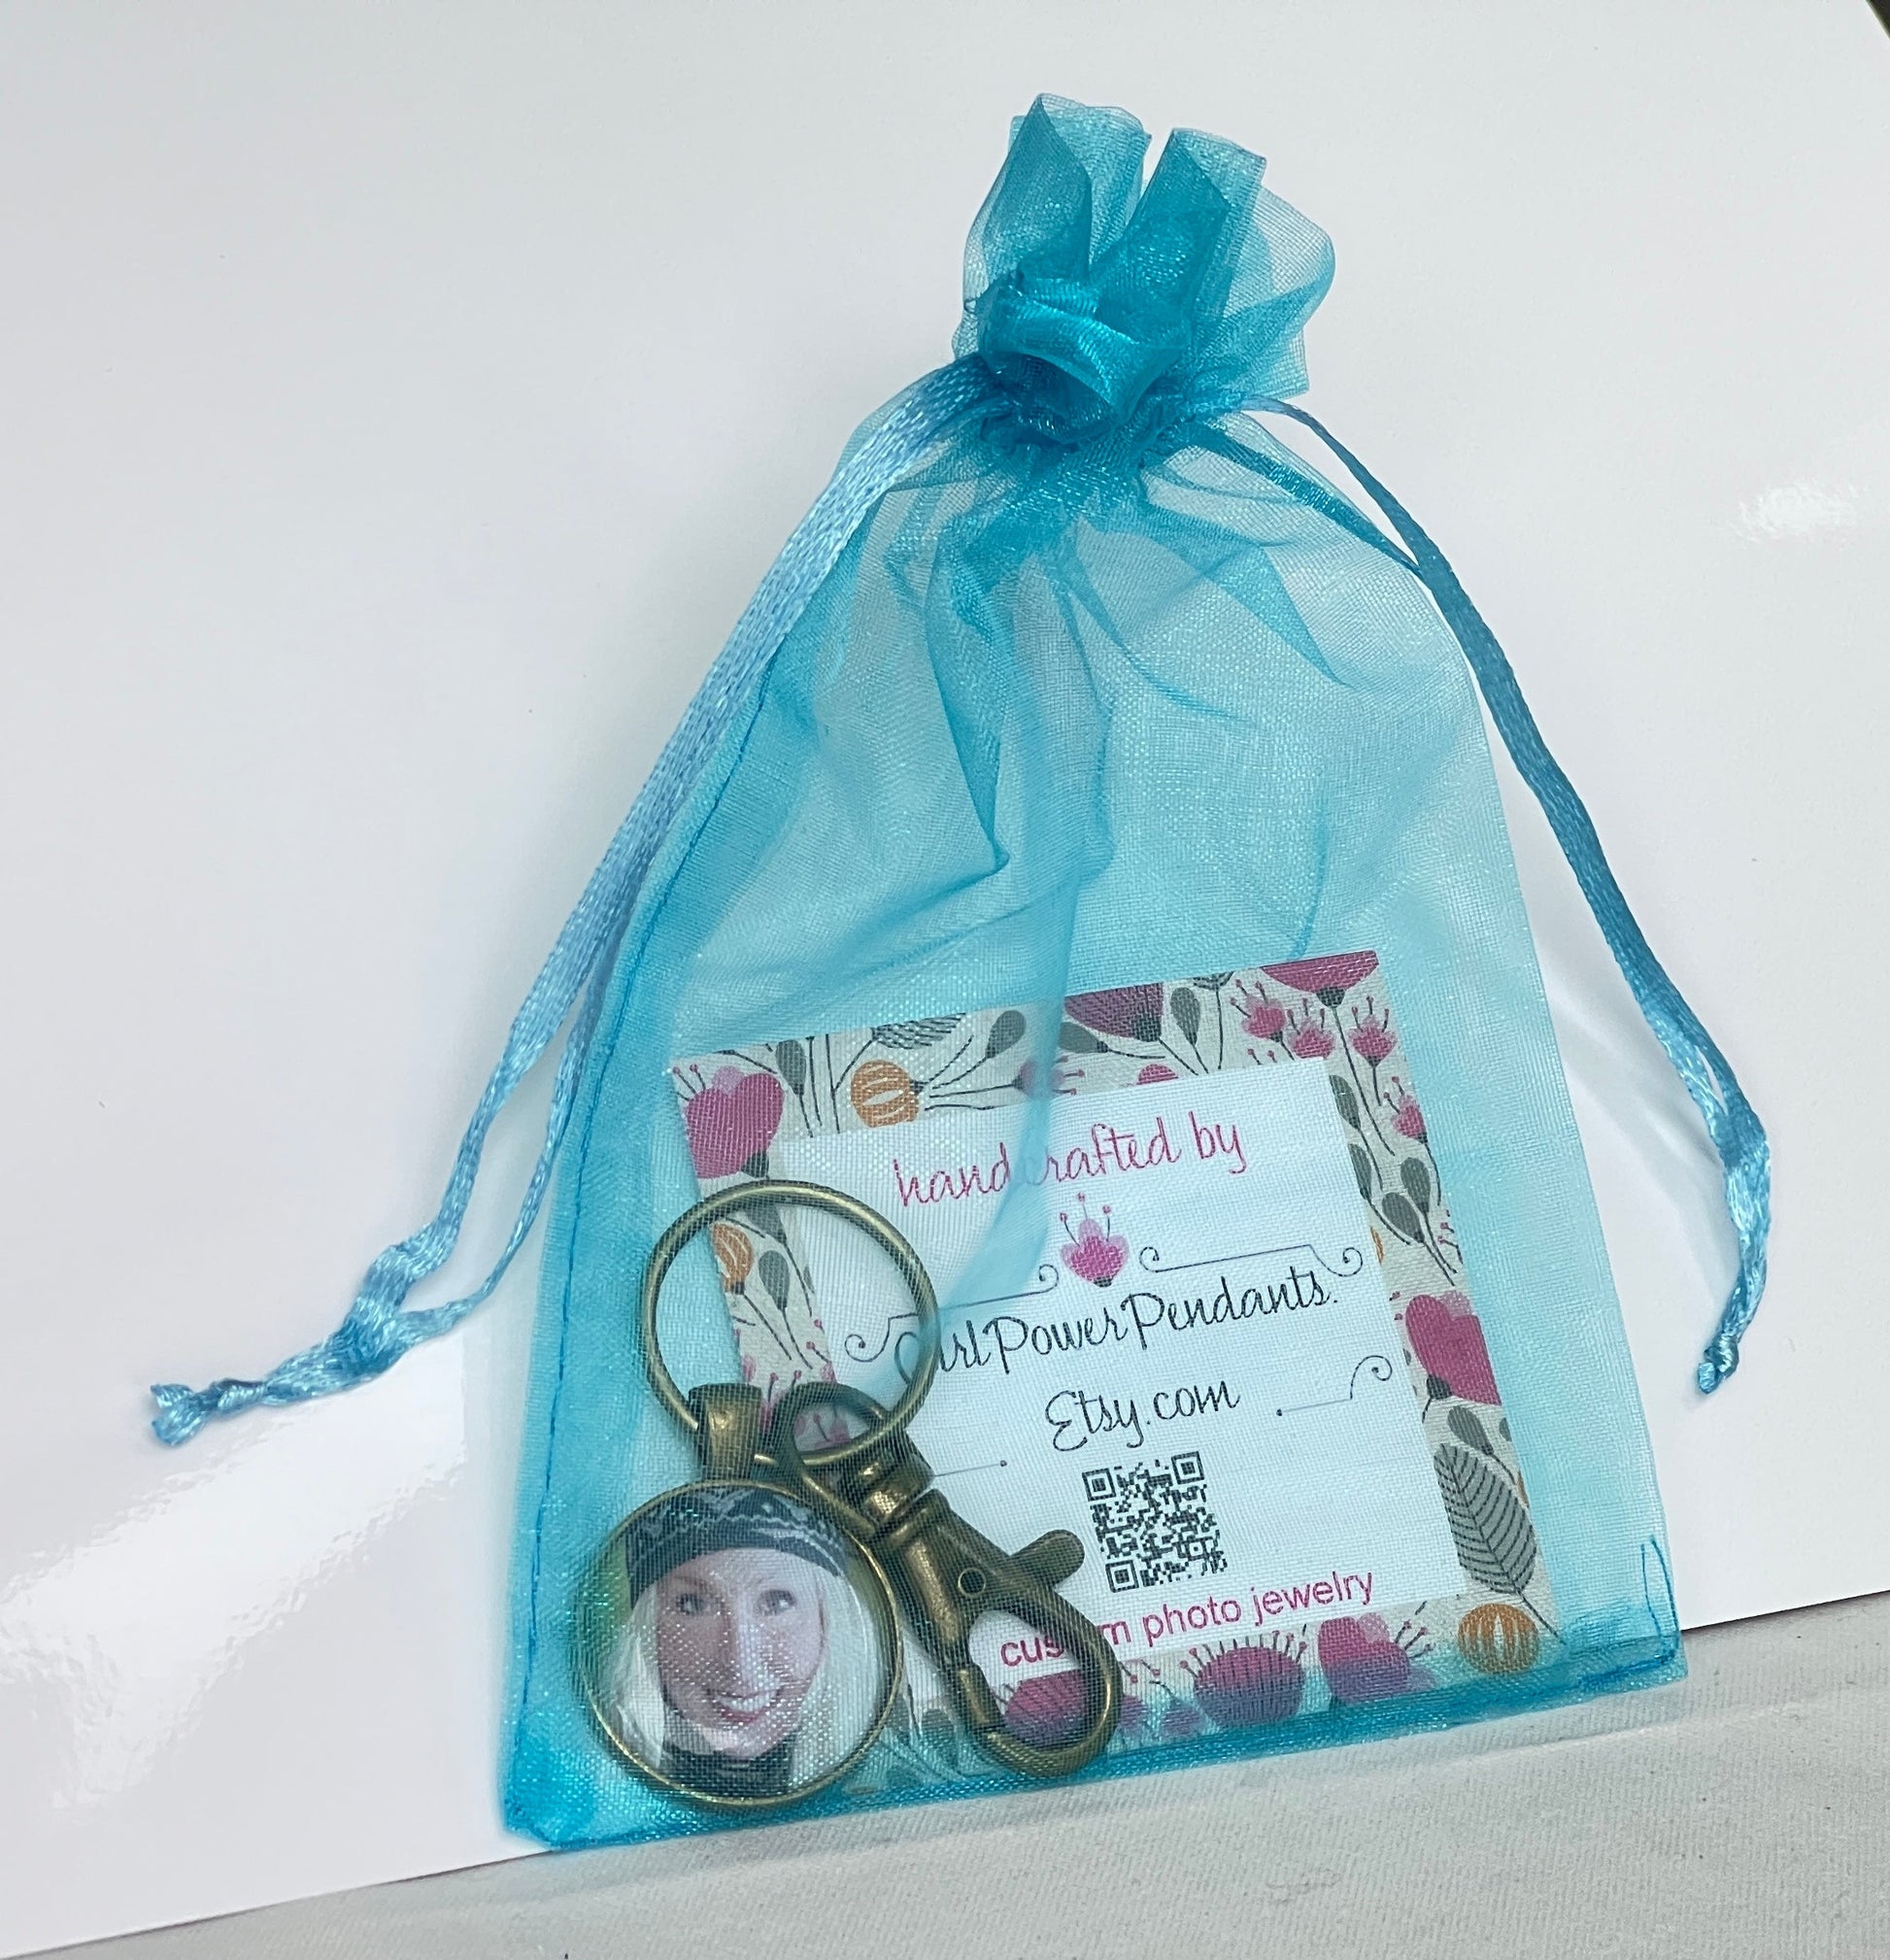 LittleGemGirl Personalized Picture Gift - Grandpa Key Chain Charm - Double Sided Custom Photo & Dictionary Definition Keychain - Father's Day Key Ring